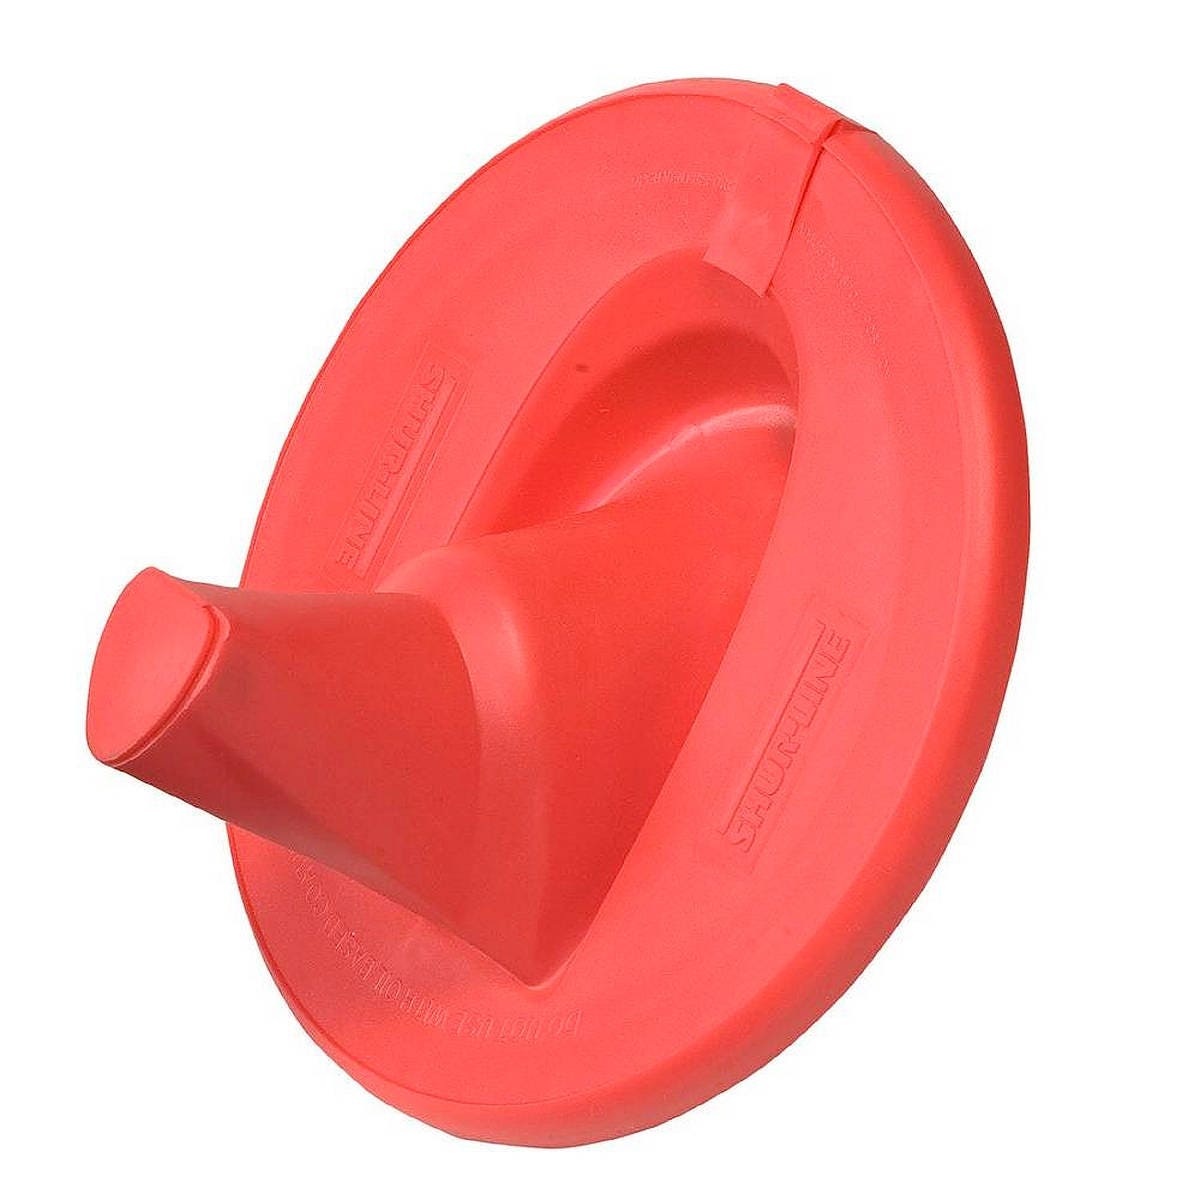 Painting Cup Water Cup With Red Lid For Painting Kids Painting 86x80mm